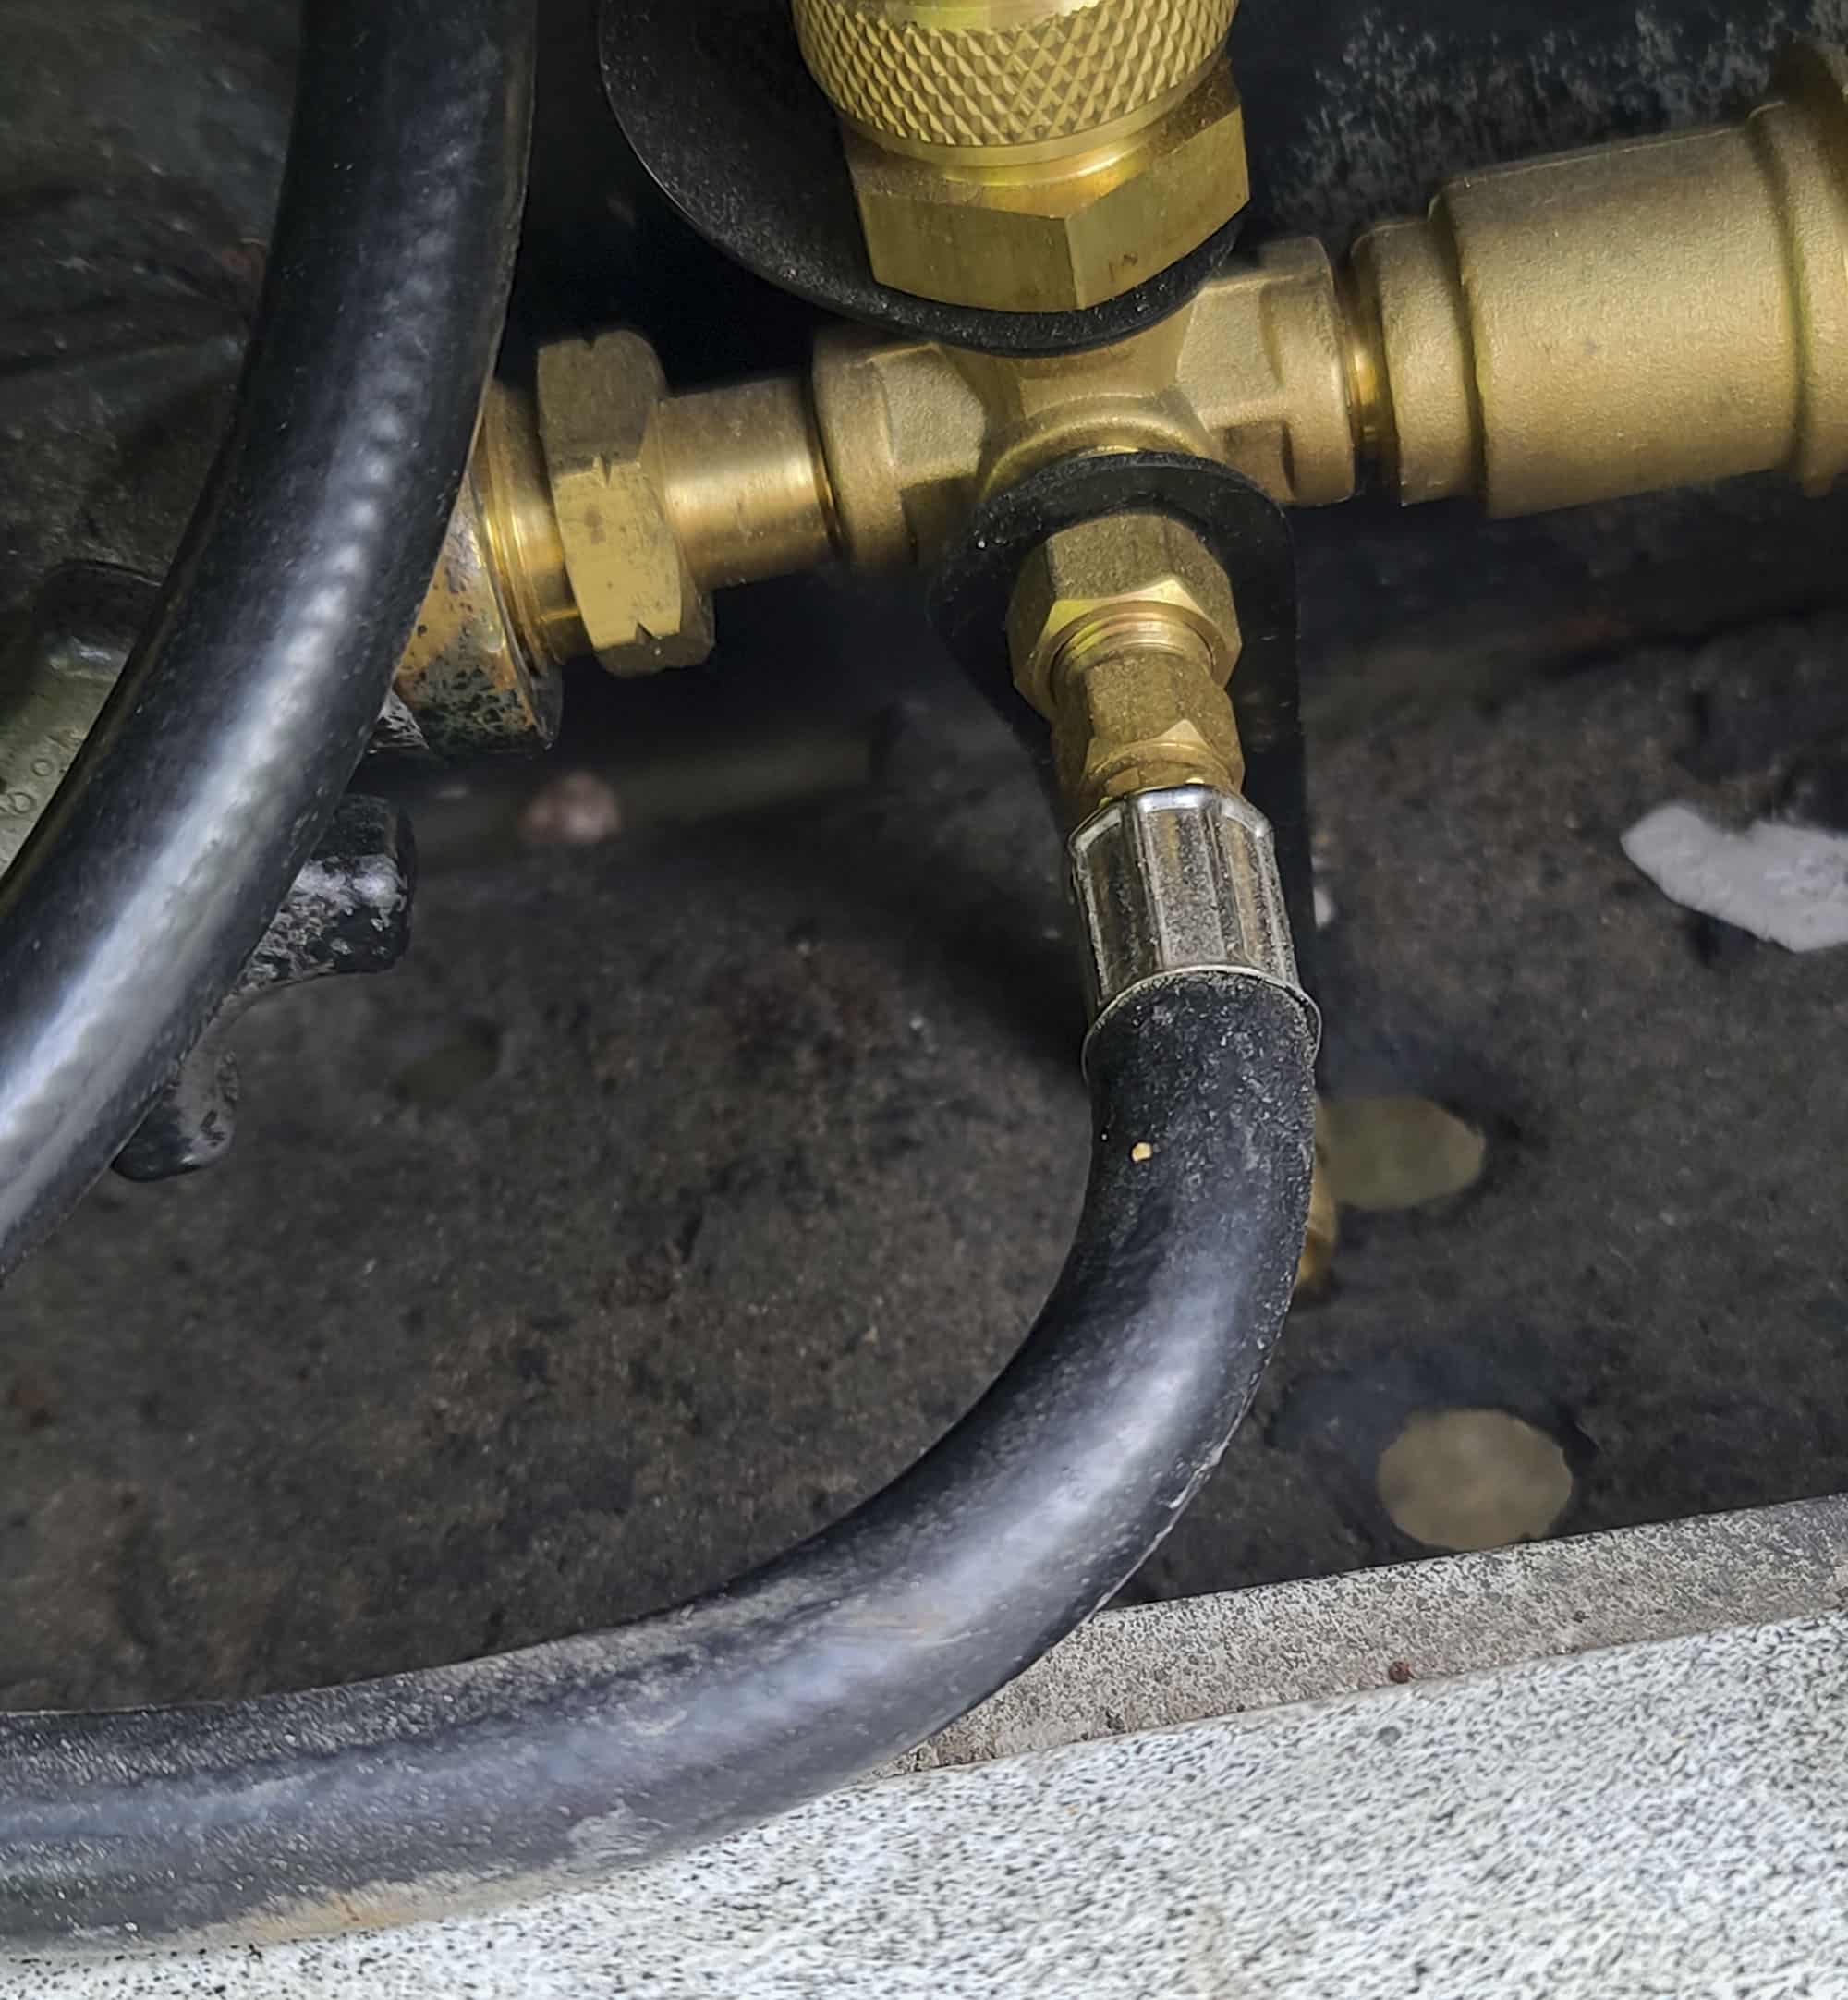 A small black propane hose is seen connected to a brass fitting.  The hose is curved to the left.